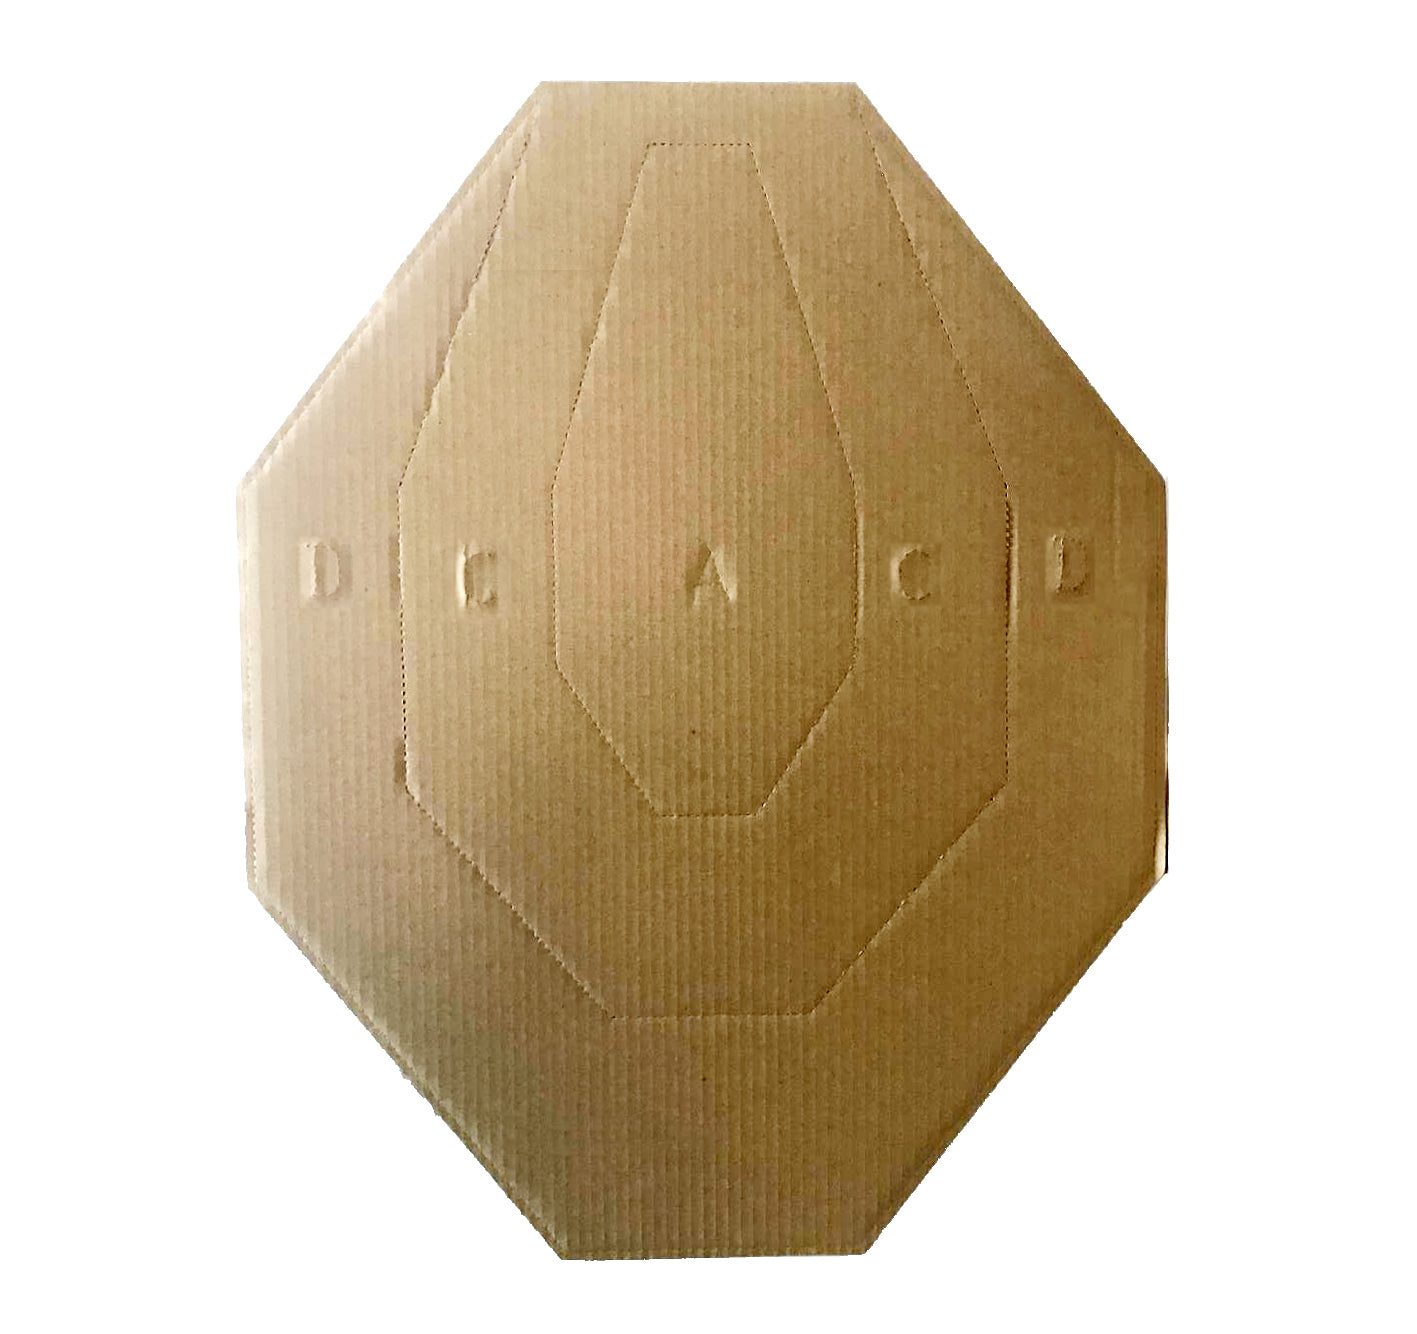 Diamond Paper Cardboard Targets 45*57cm 50pcs/set Idpa Ipsc Official Competition Cardboard Shooting Target